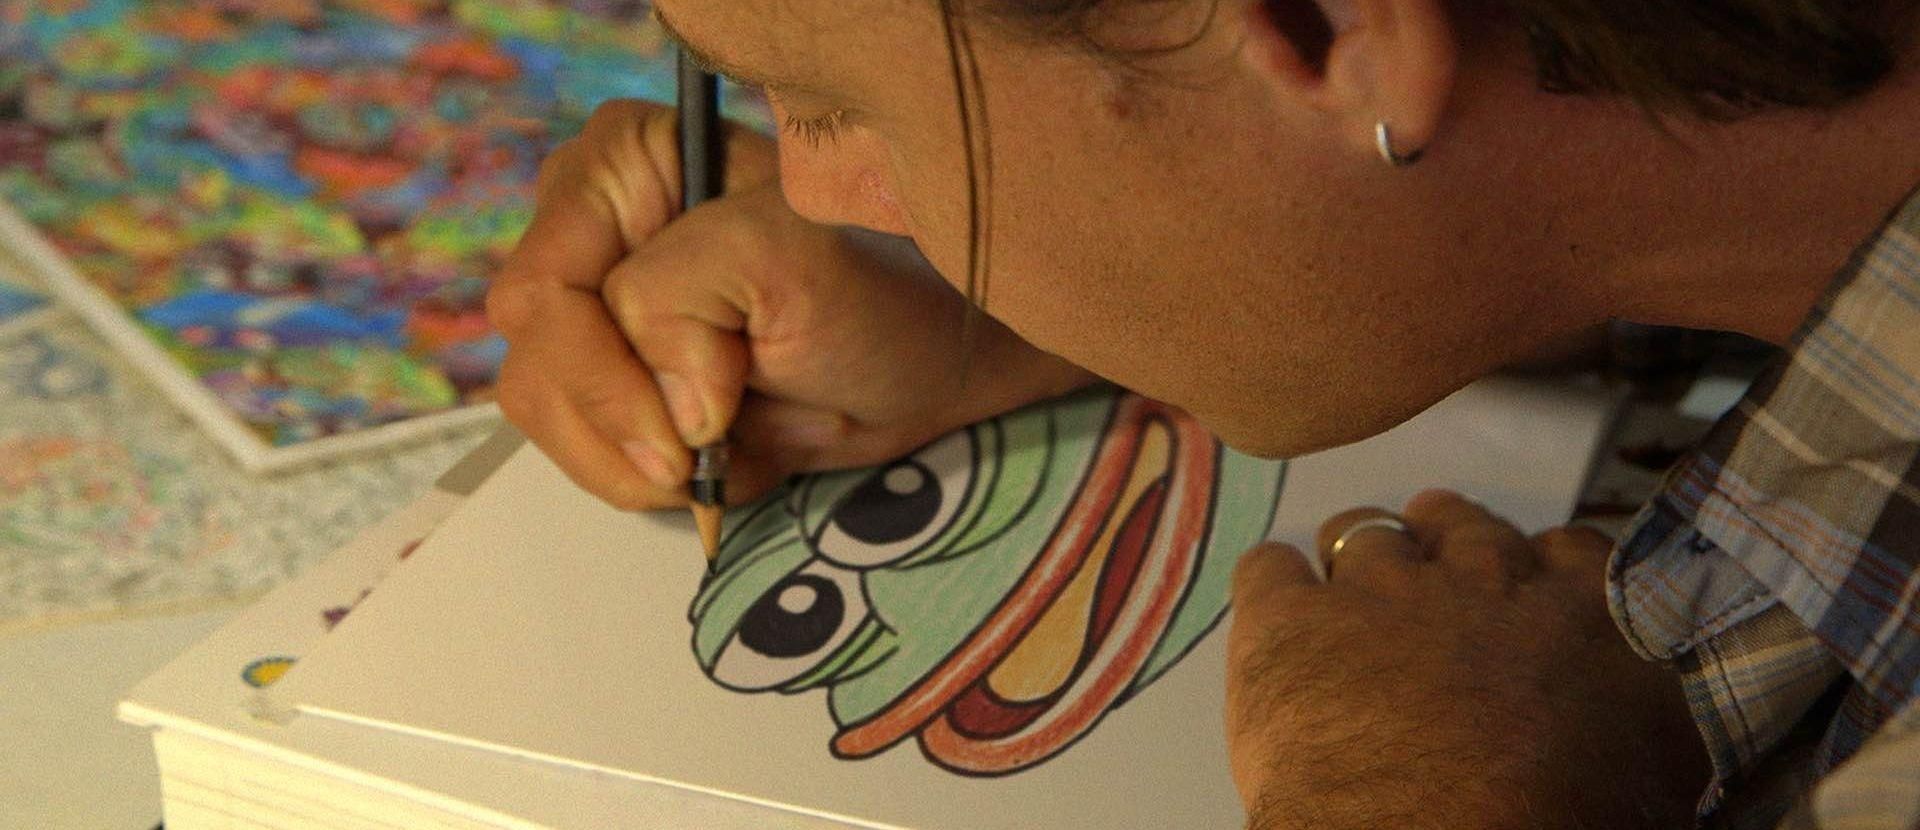 An artist drawing Pepe the Frog